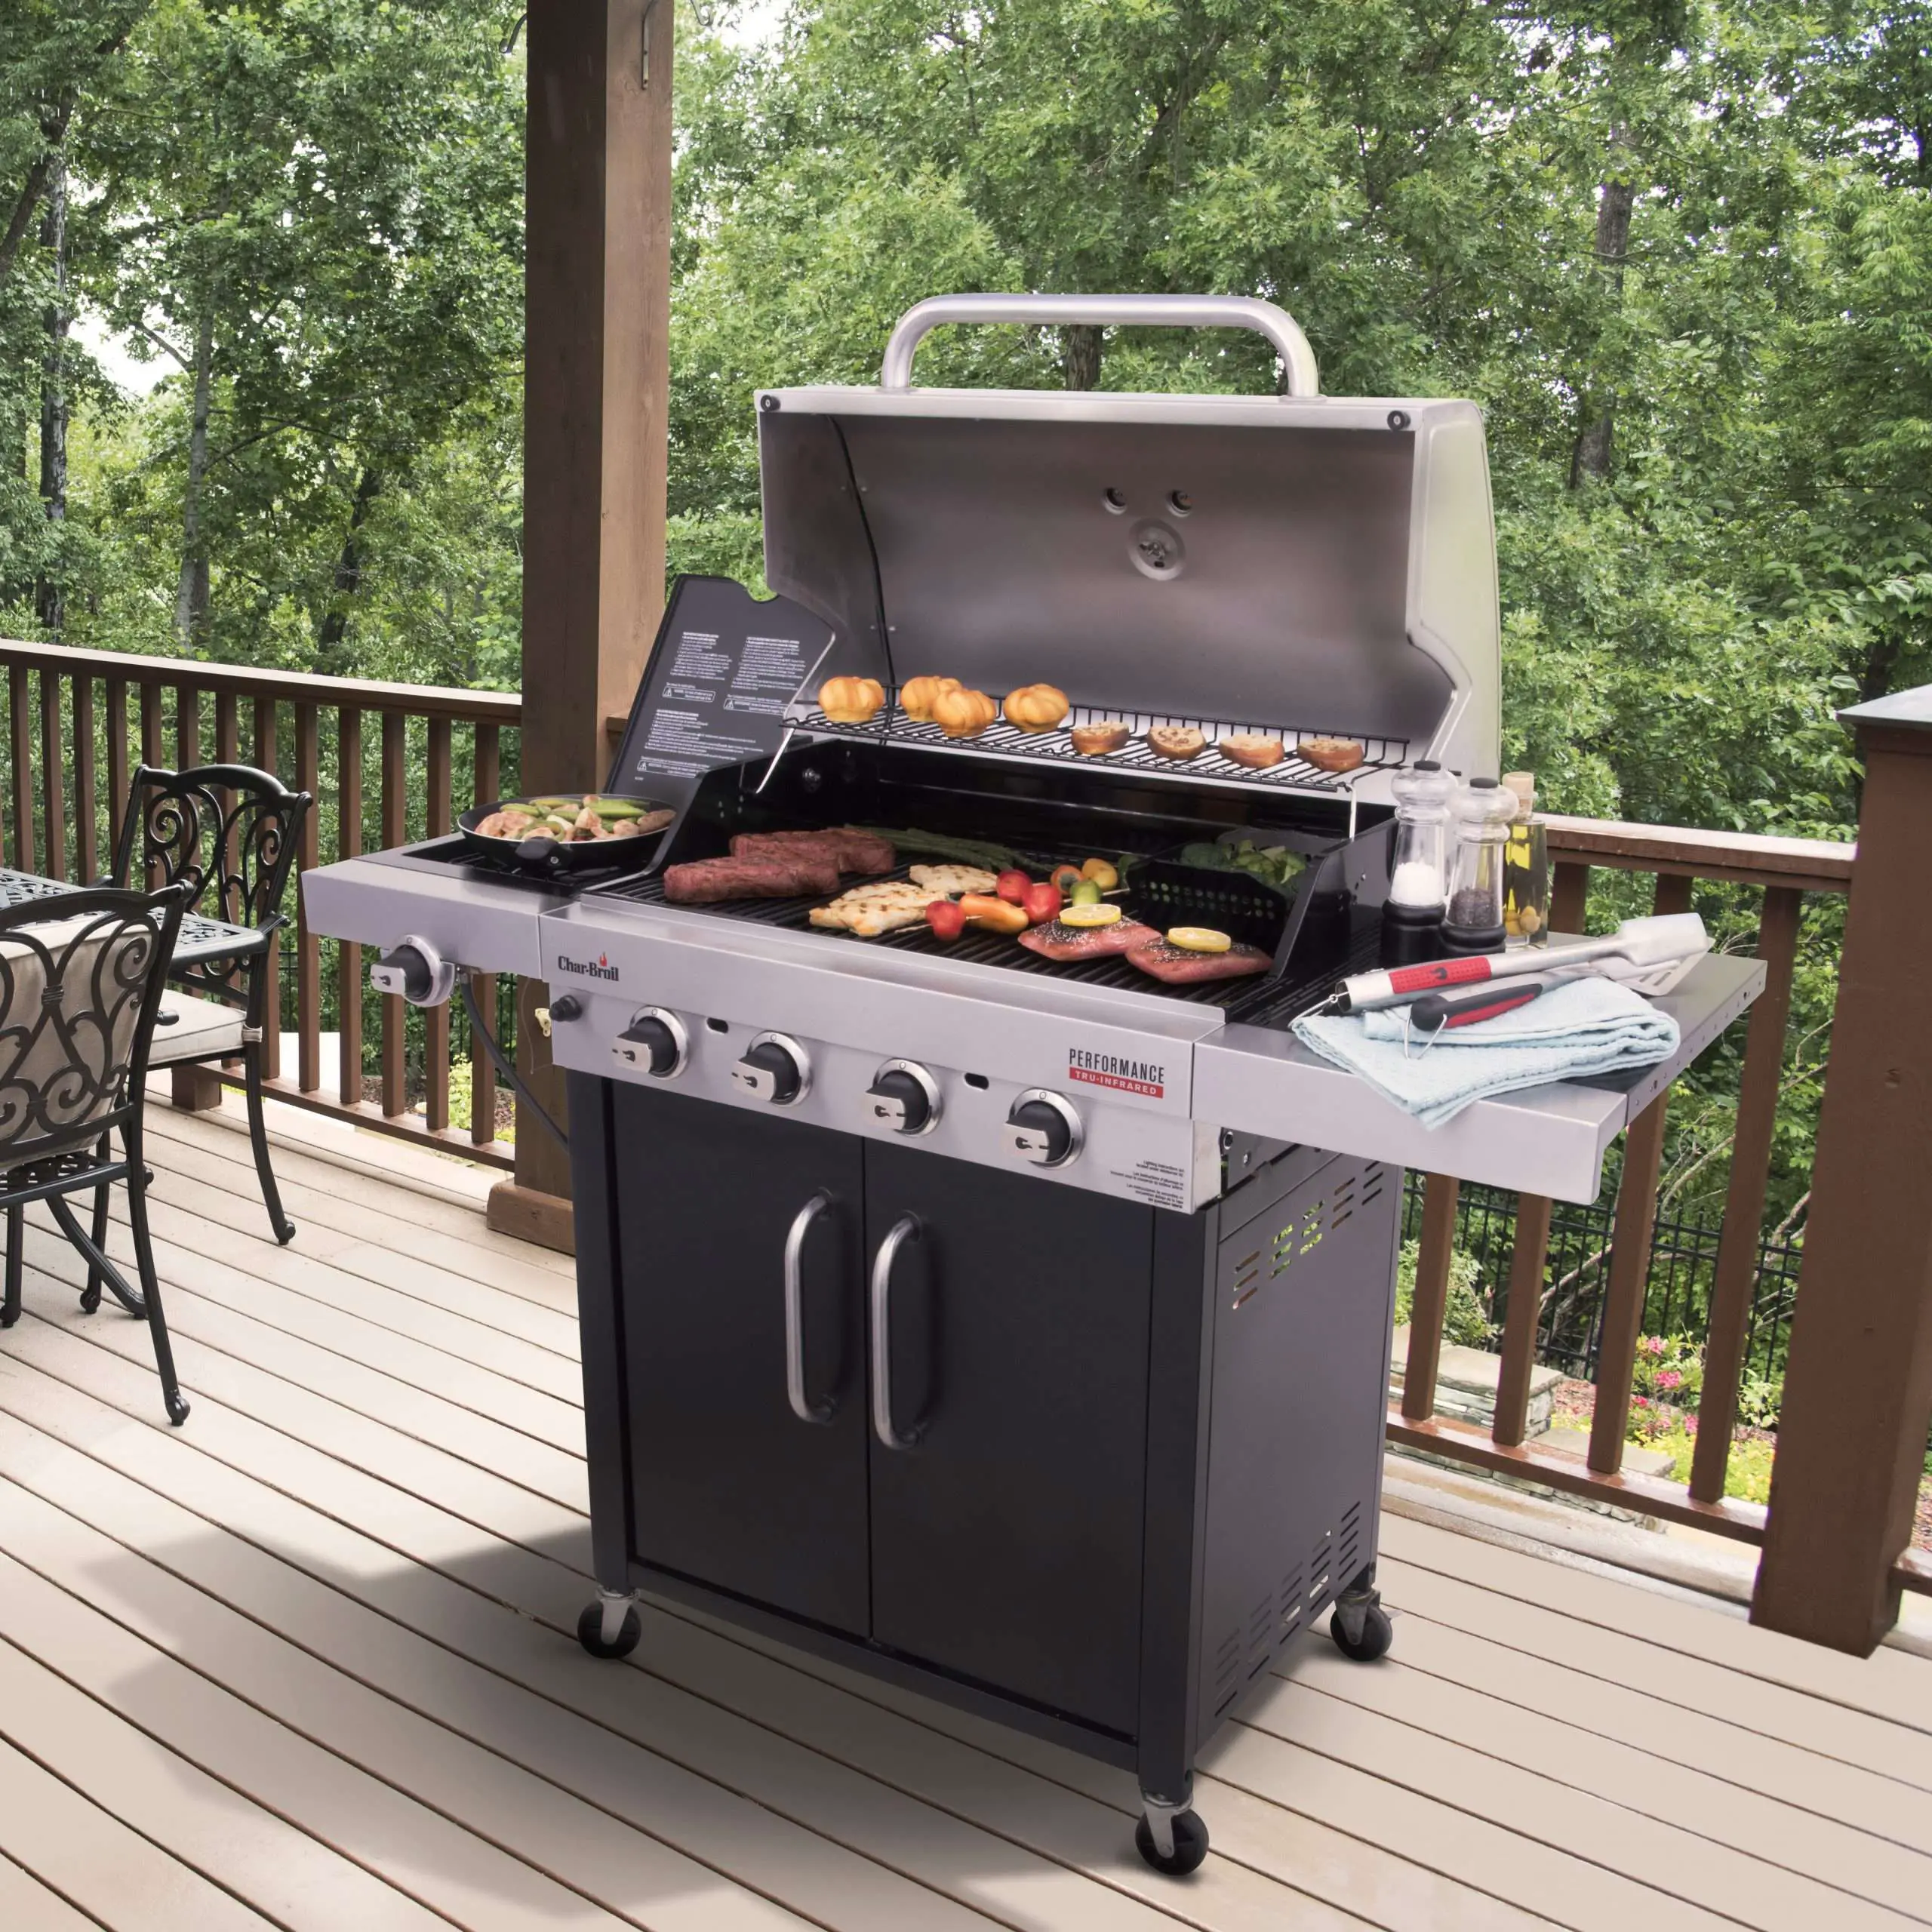 [BIG SALE] Top Brands: Gas Grills Youll Love In 2020 ...